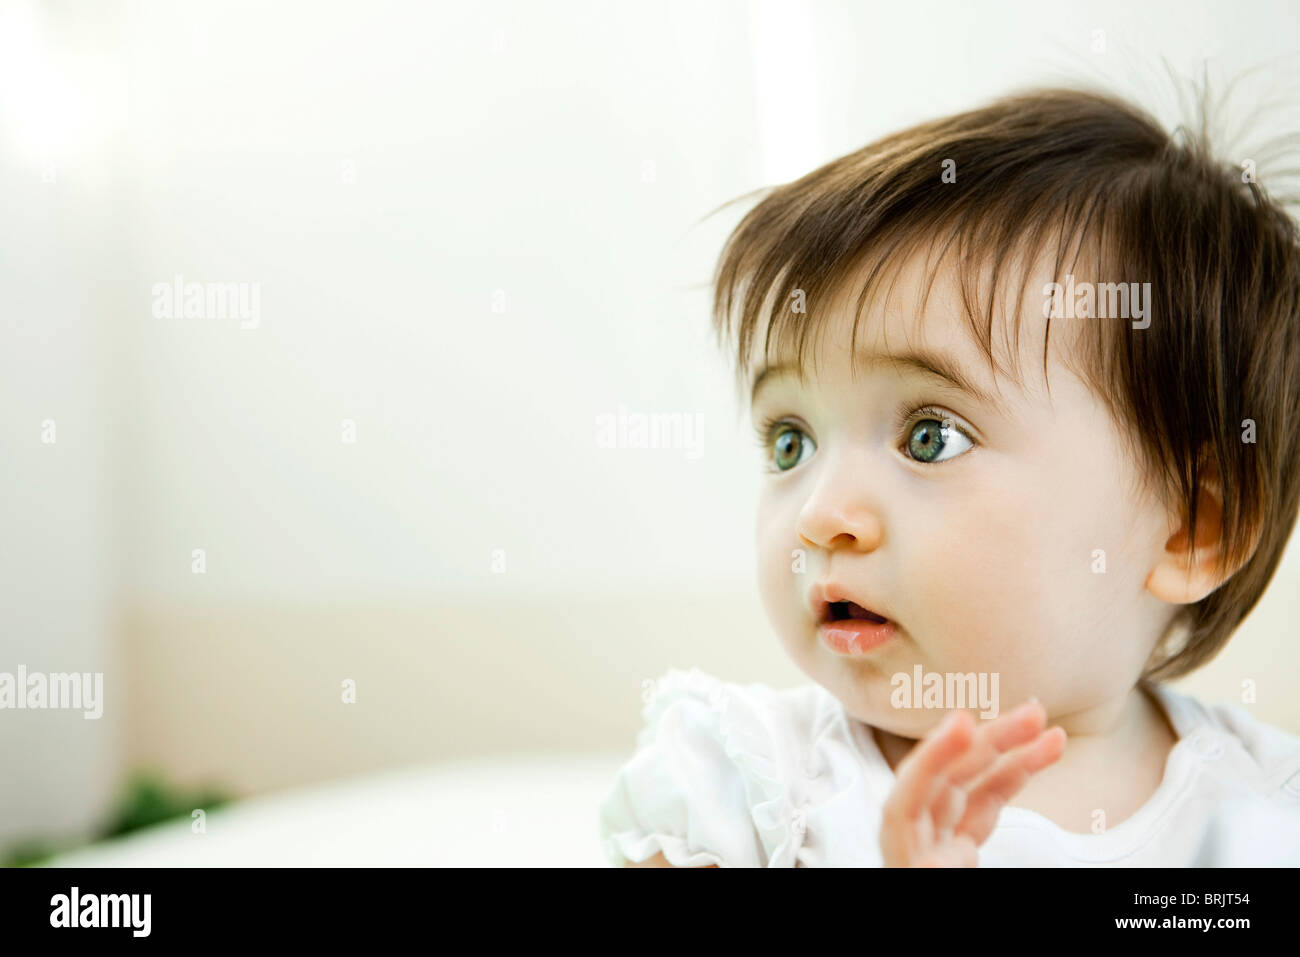 Baby girl with startled expression, portrait Stock Photo